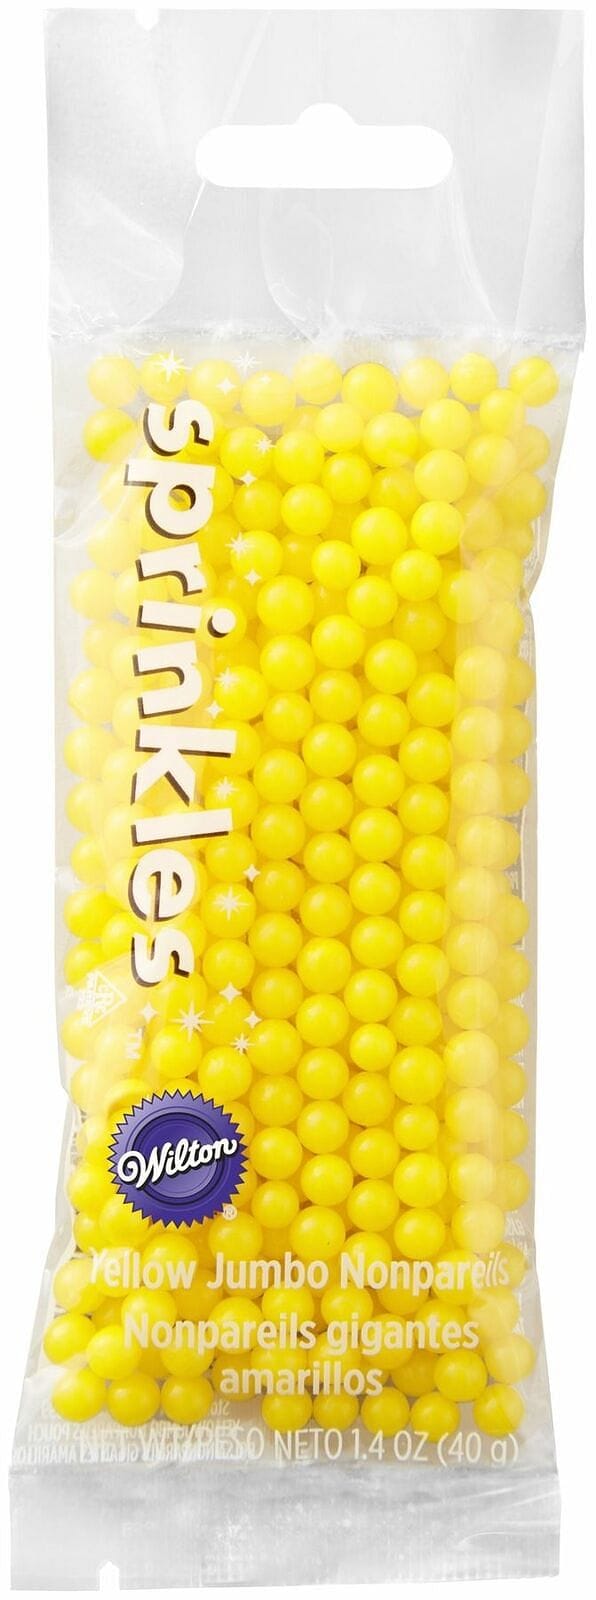 Jumbo Nonpareils Sprinkles Pouch - Yellow - 1.4 oz. - Shelburne Country Store